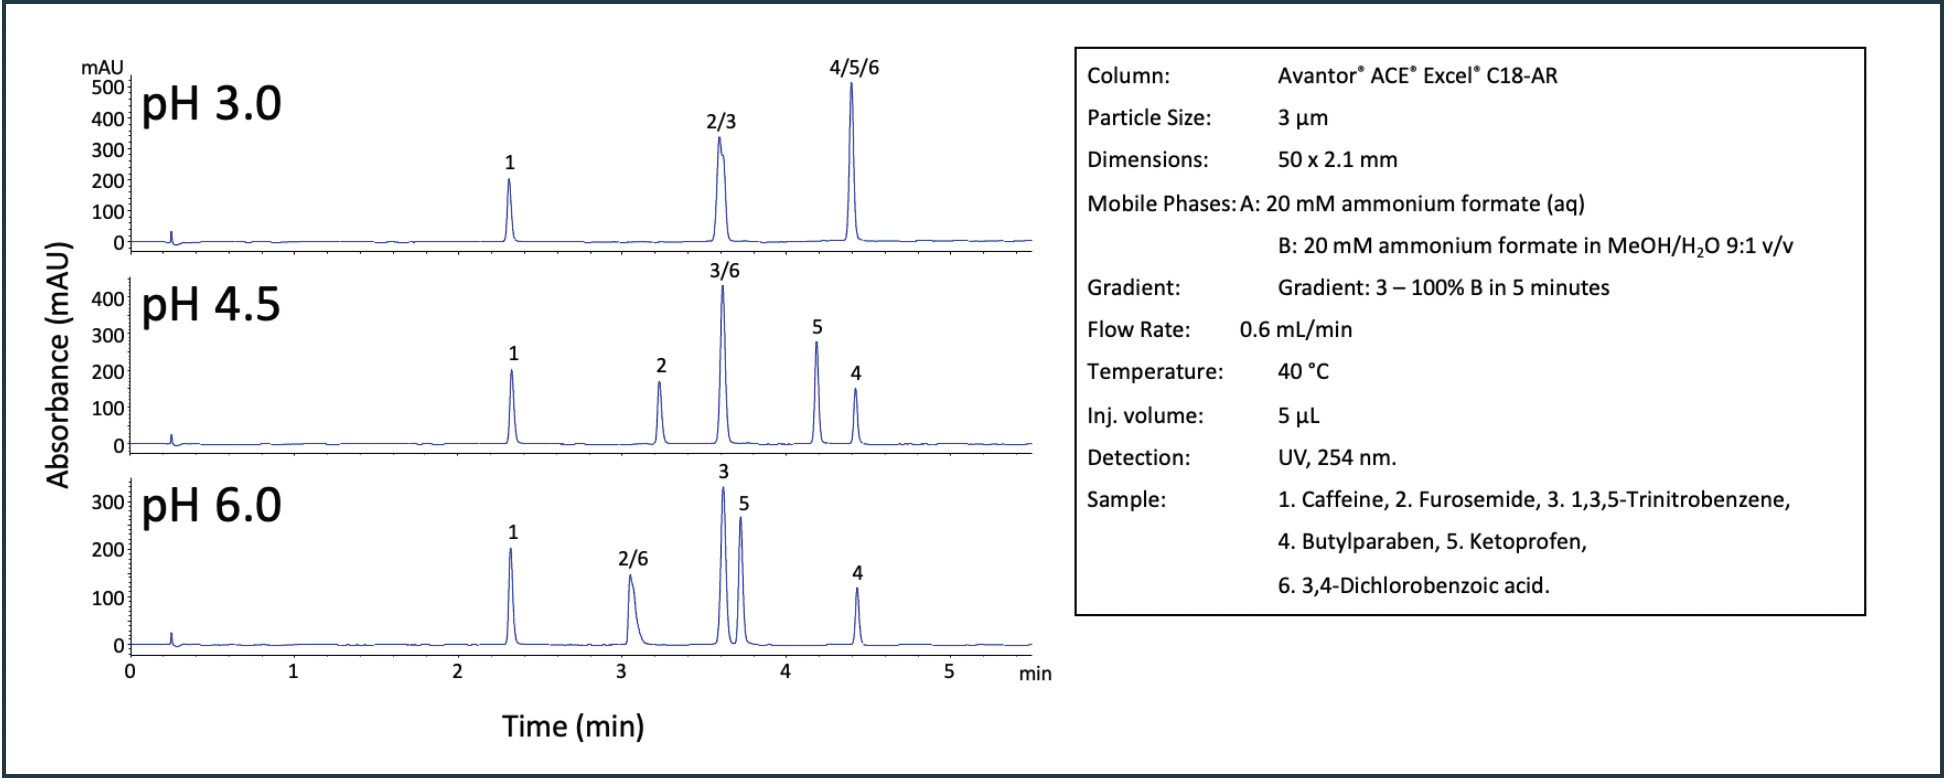 FIGURE 7: Separation of a six analyte test mix at pH 3, 4.5, and 6.